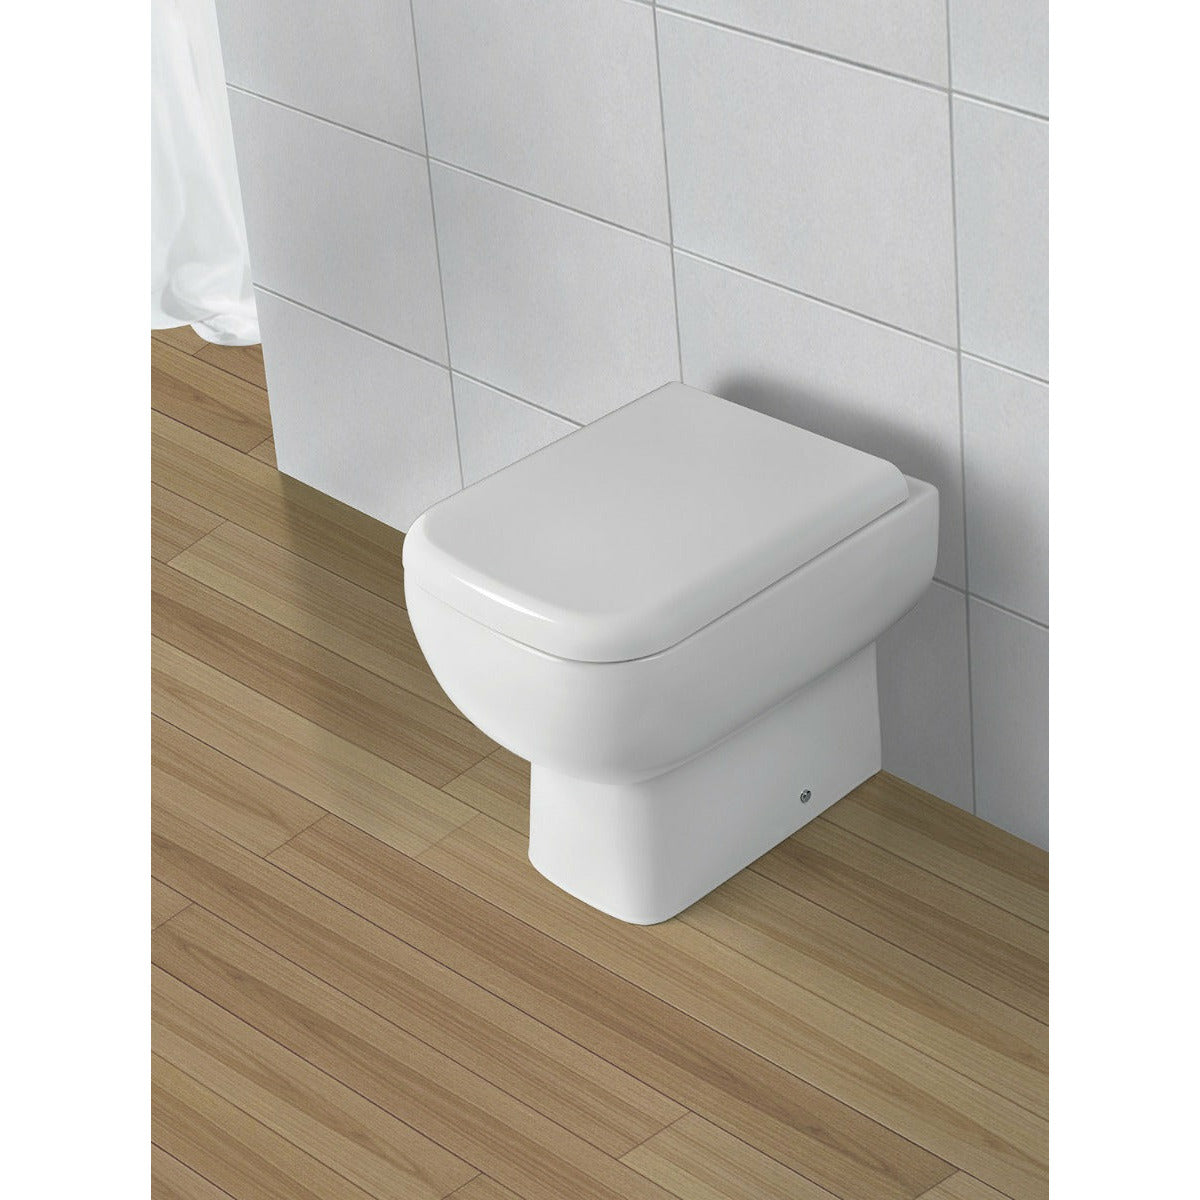 Frontline Series 600 Back-to-Wall Toilet - Letta London - 